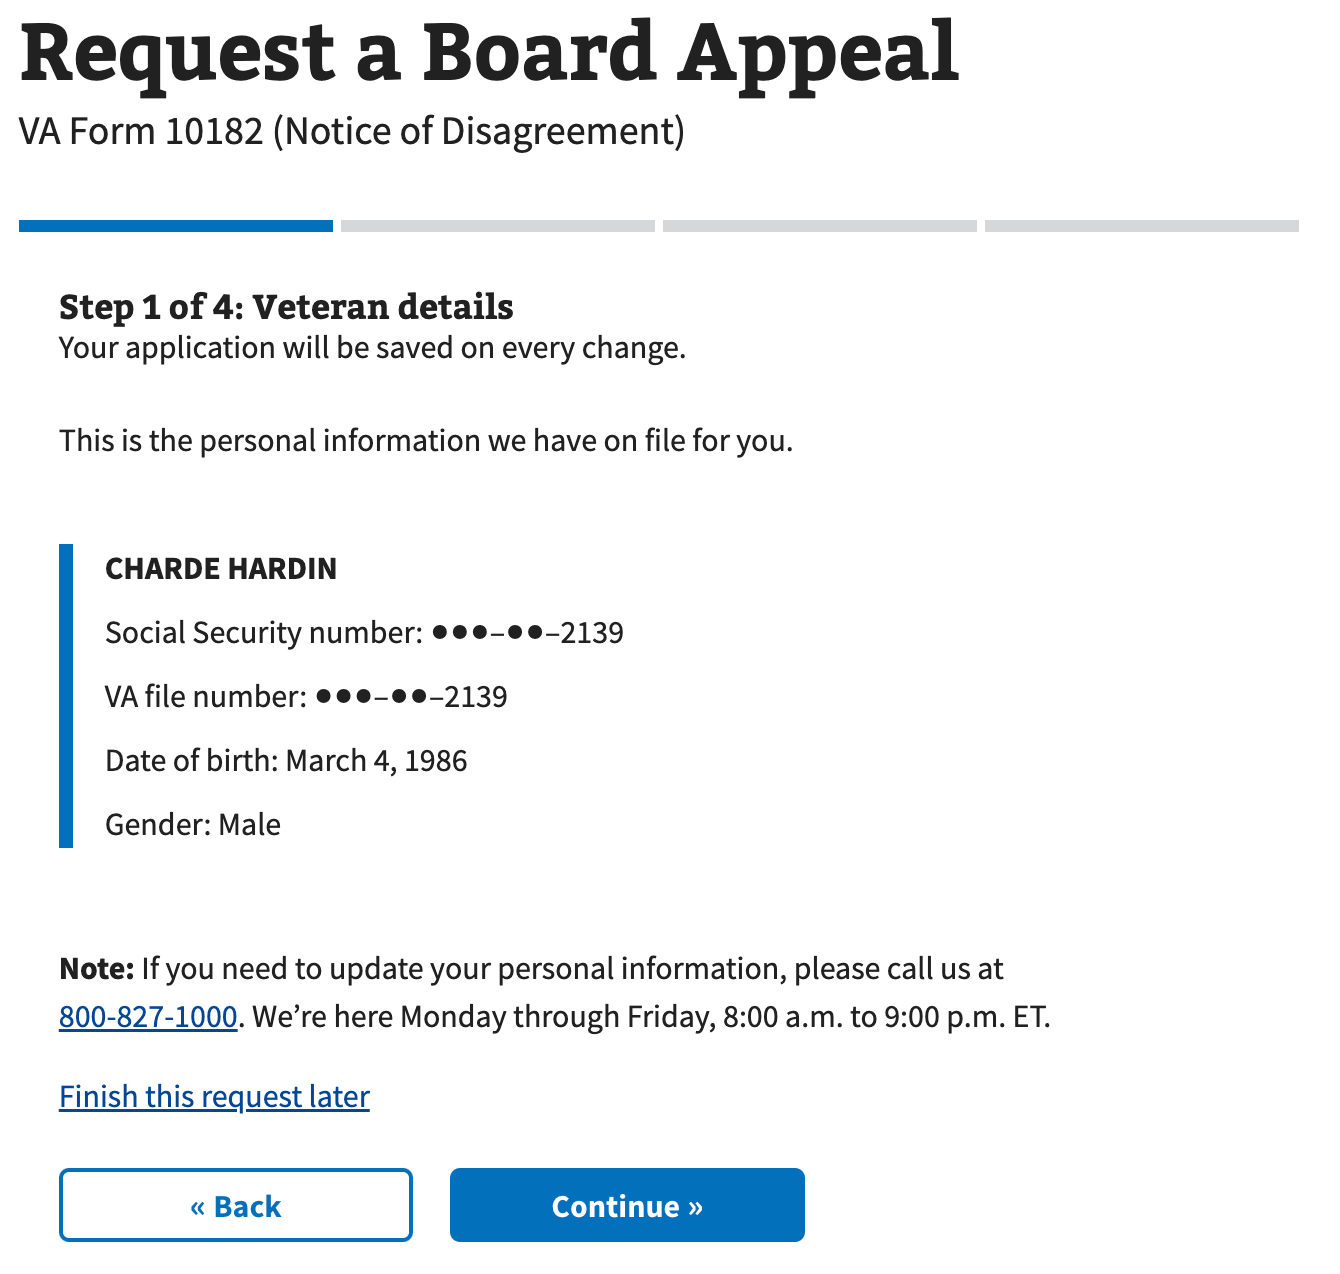 Veteran details from the Request a Board Appeal application.